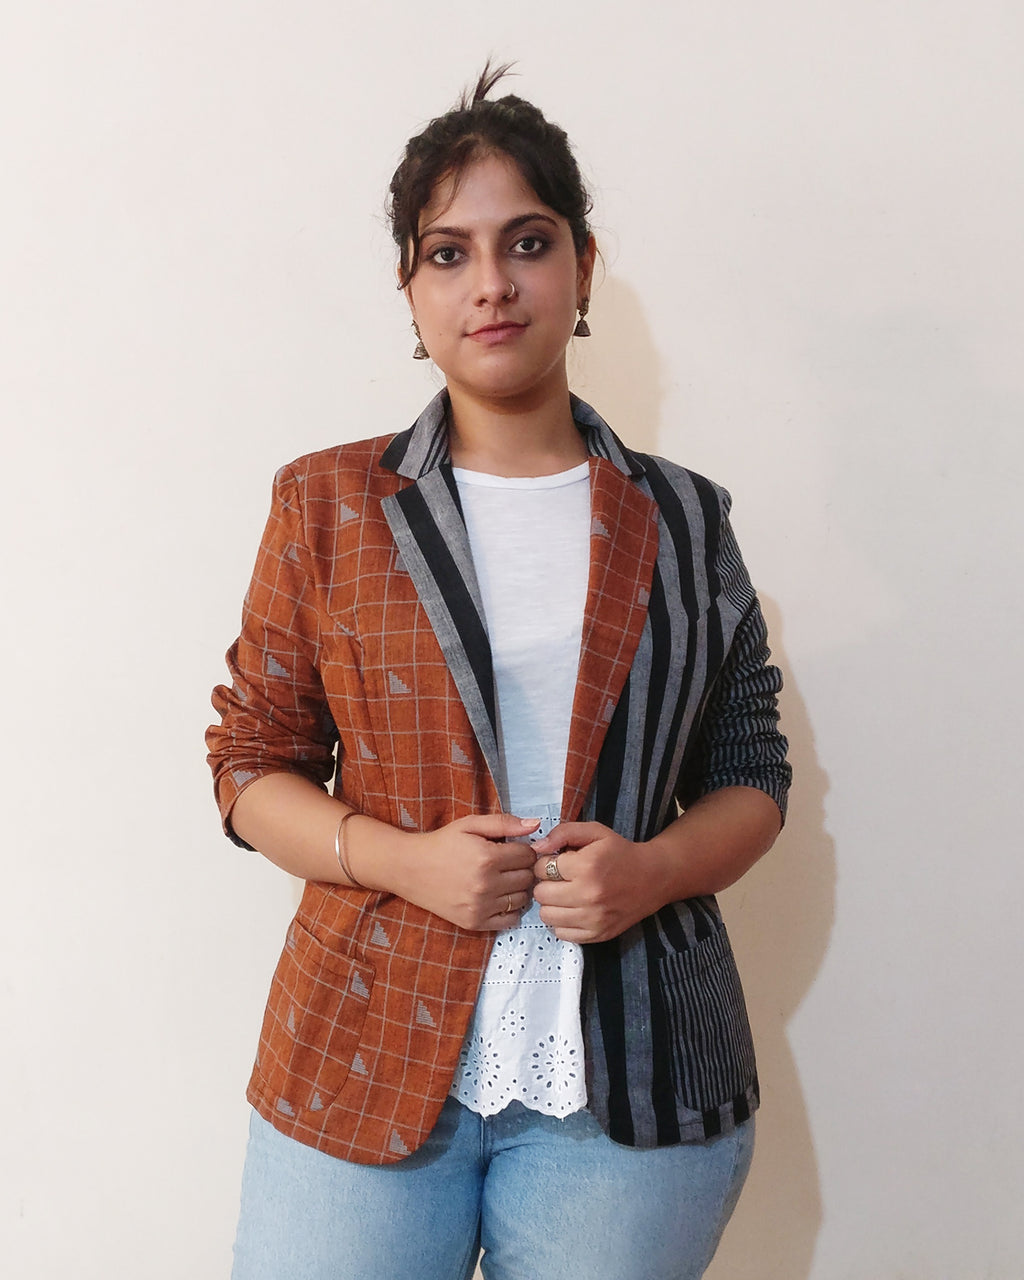 This blazer is made of single fabric which has 3 patterns - orange, black and grey wide stripe, black and grey narrow stripe. Each piece has different face depending on the position of each pattern. Cool cotton thin blazer jacket from women's base body pattern. Buy online!